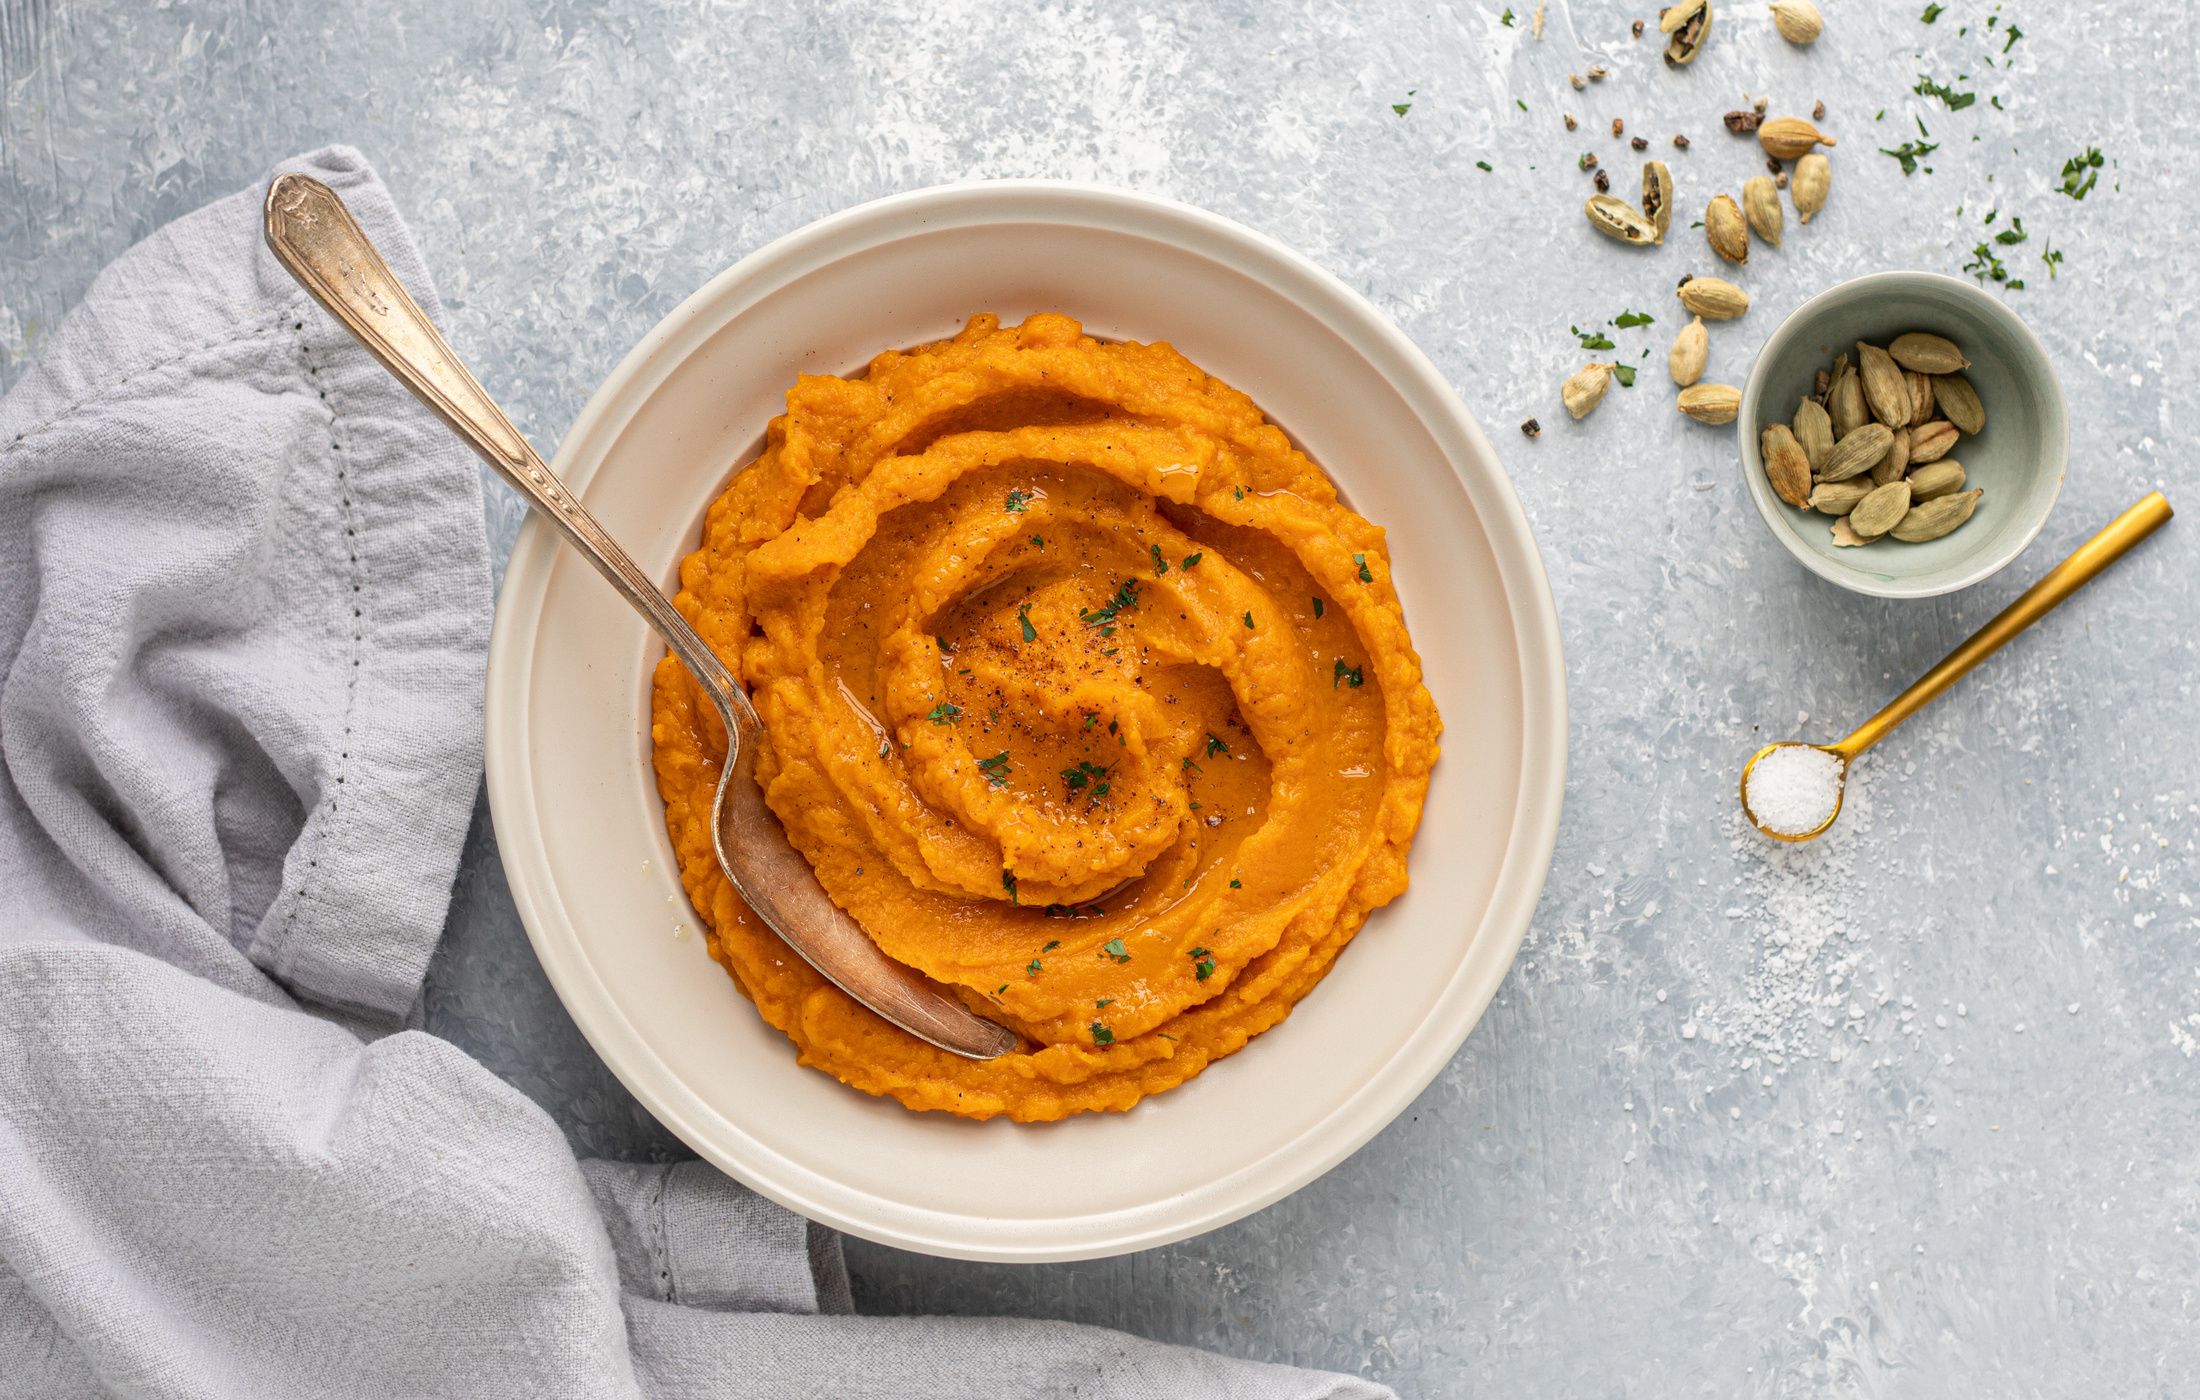 Whipped Sweet Potatoes with Cardamom